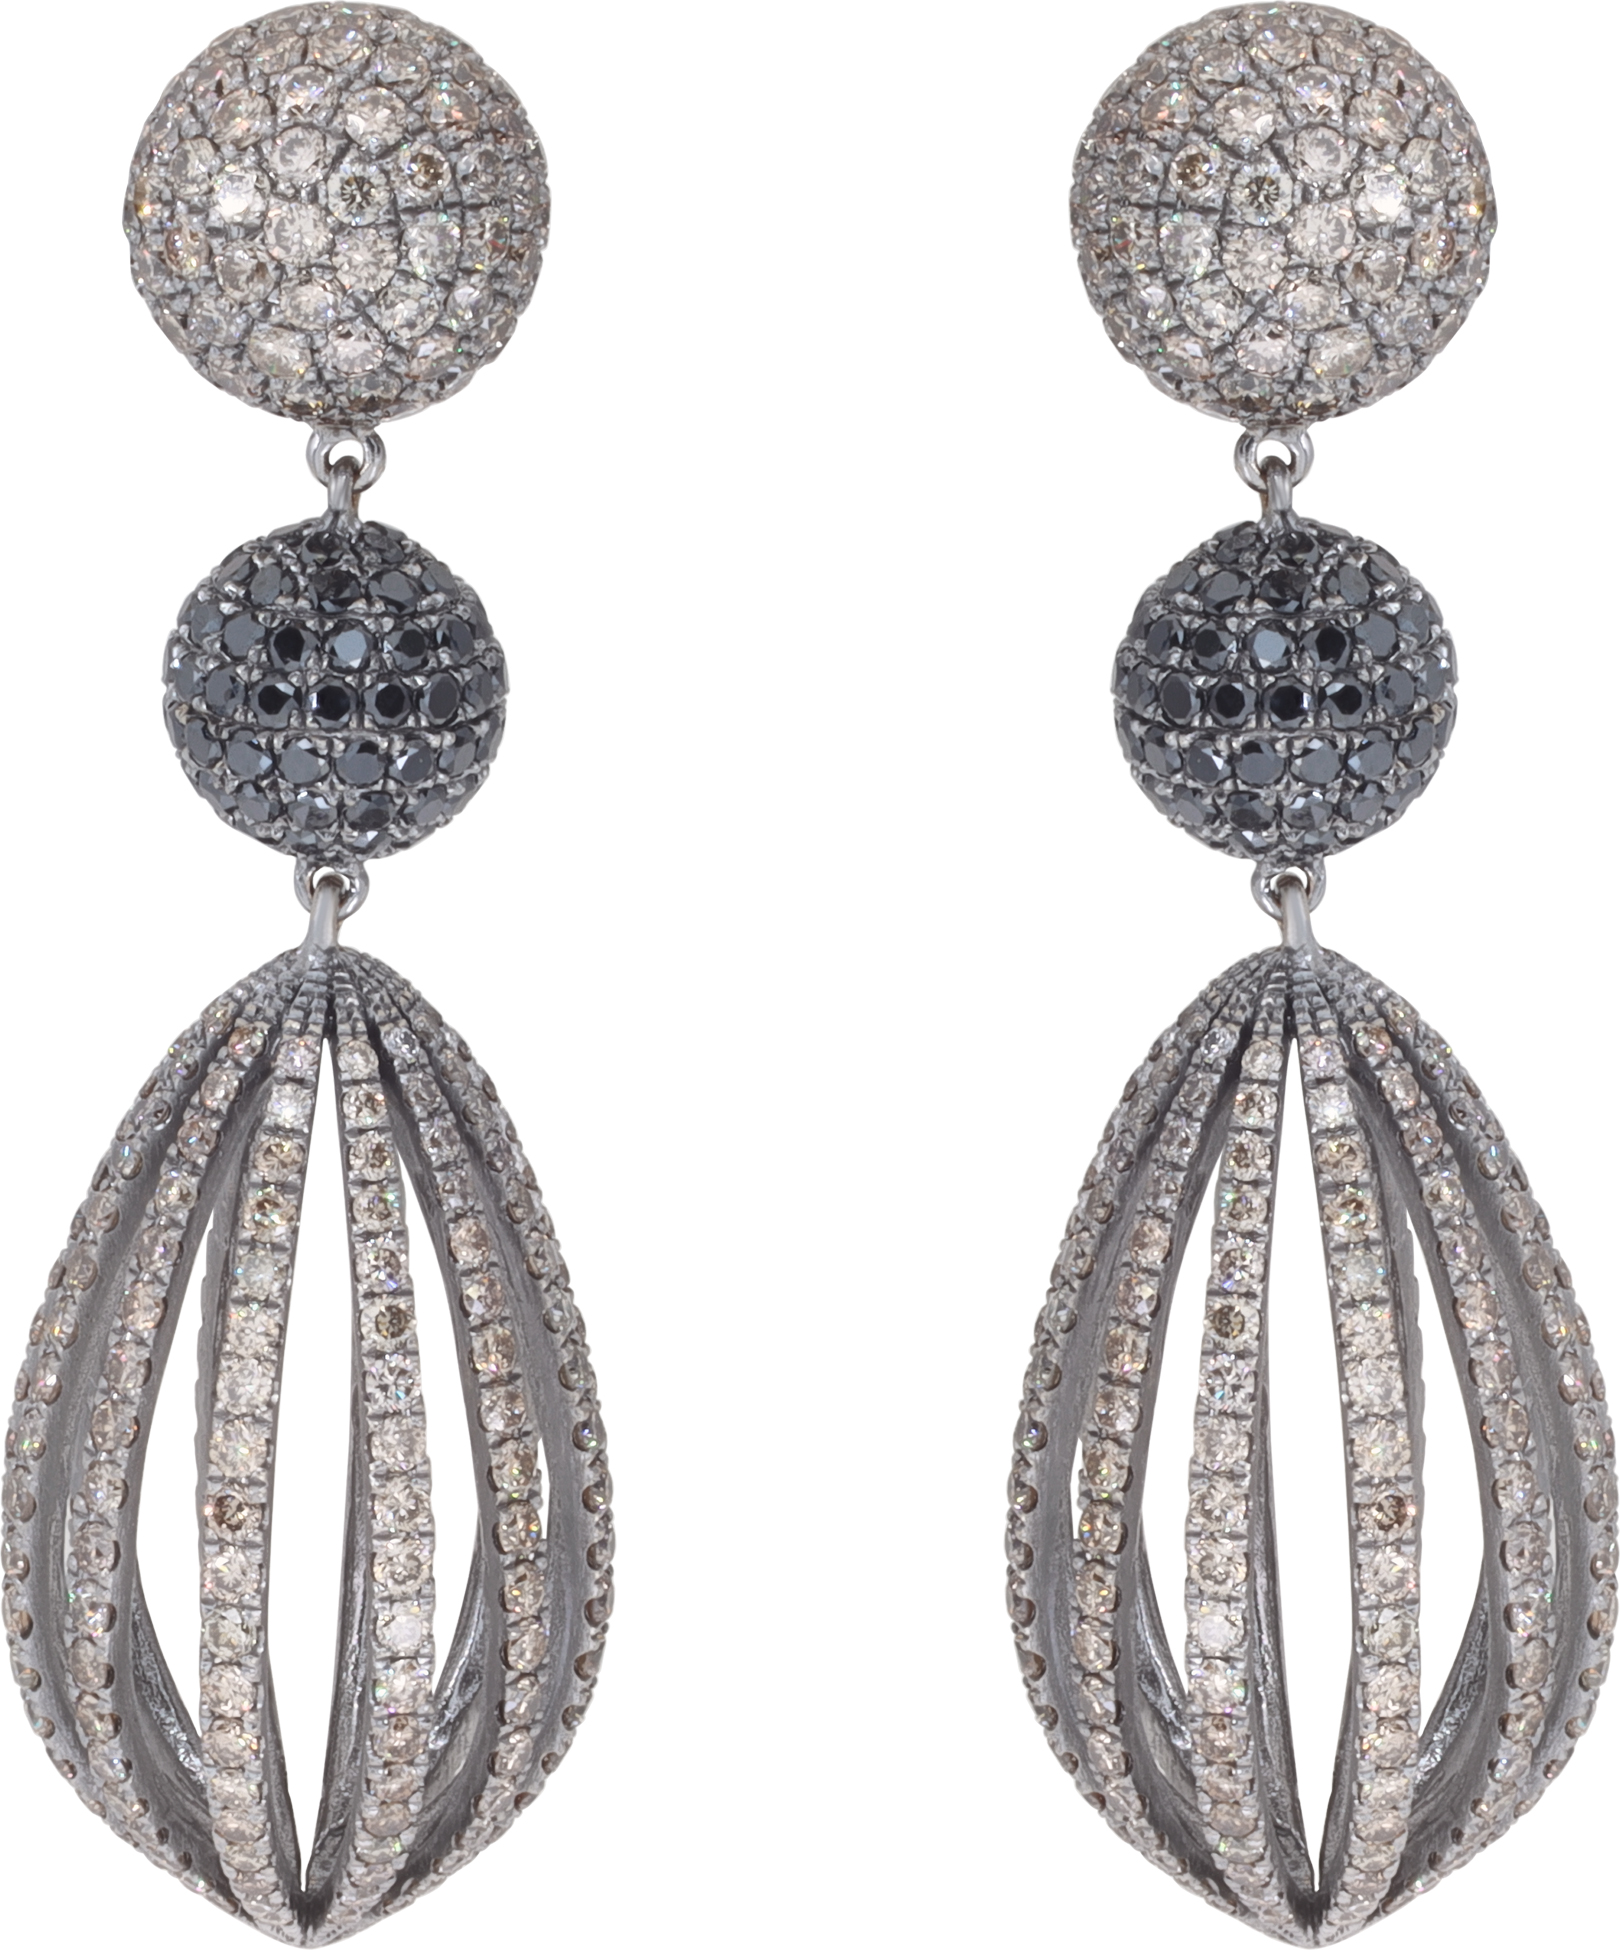 Champagne and black pave diamond bird cage earrings.